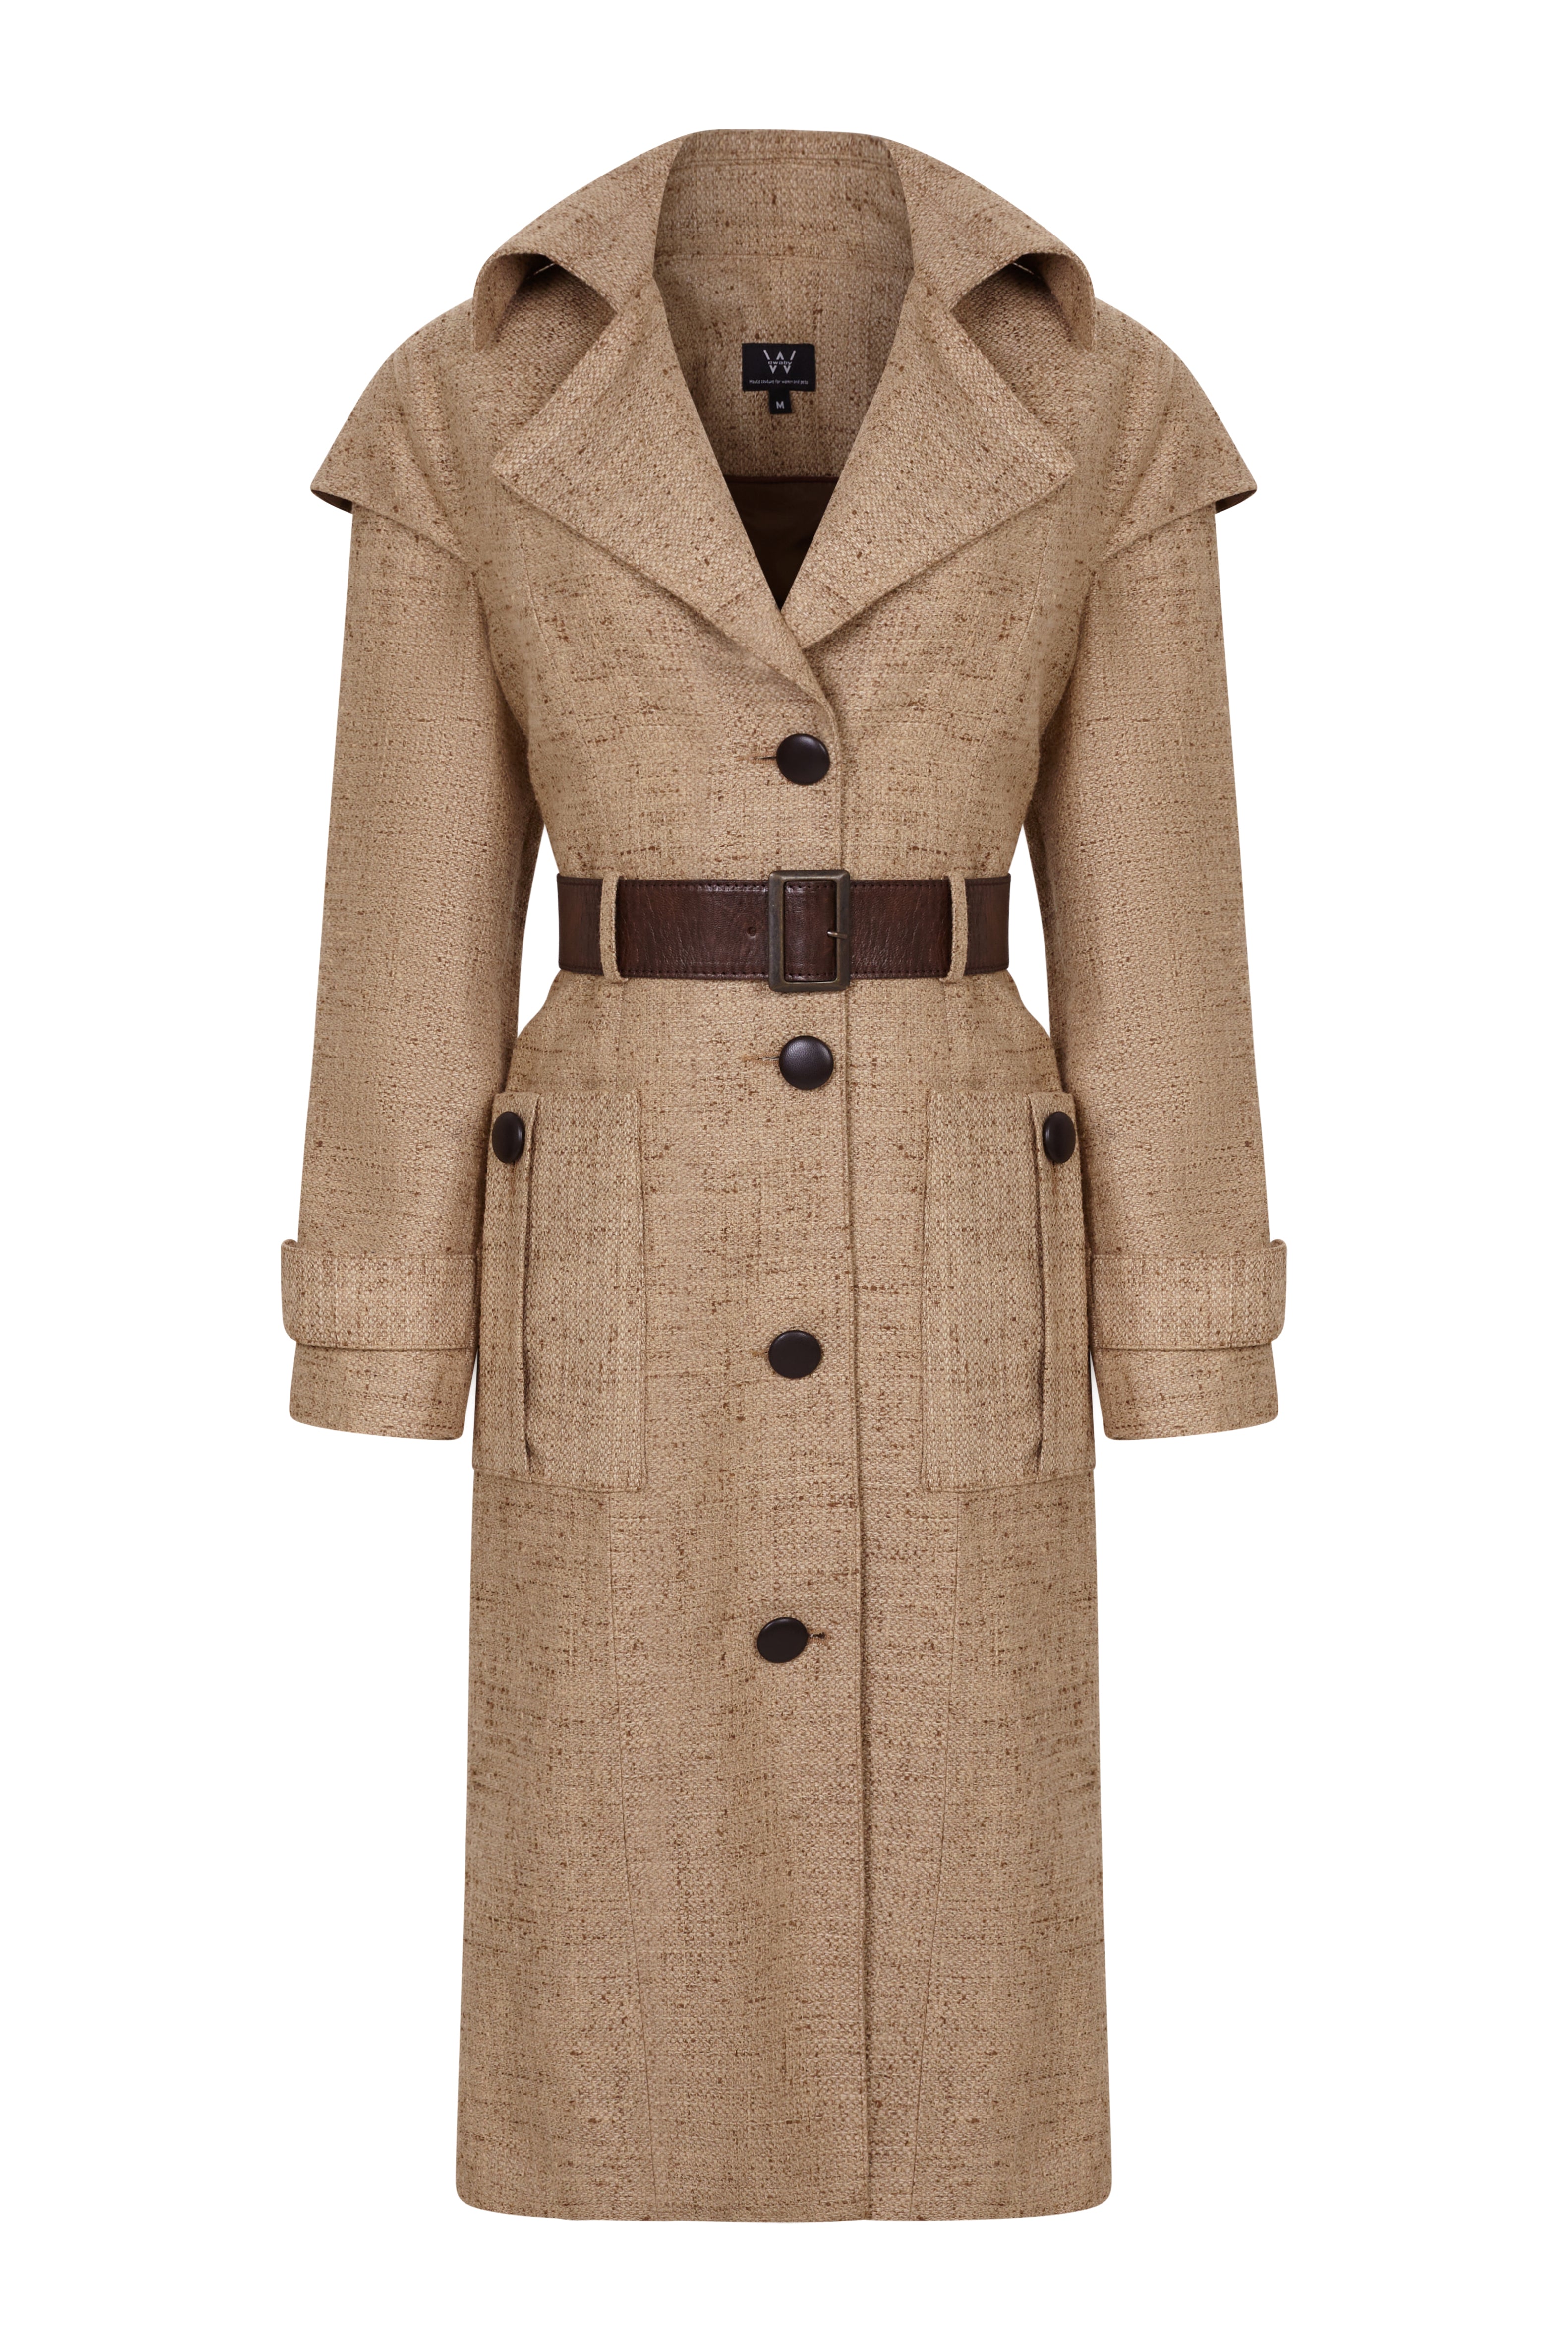 The camel coat | wild silk with leather details